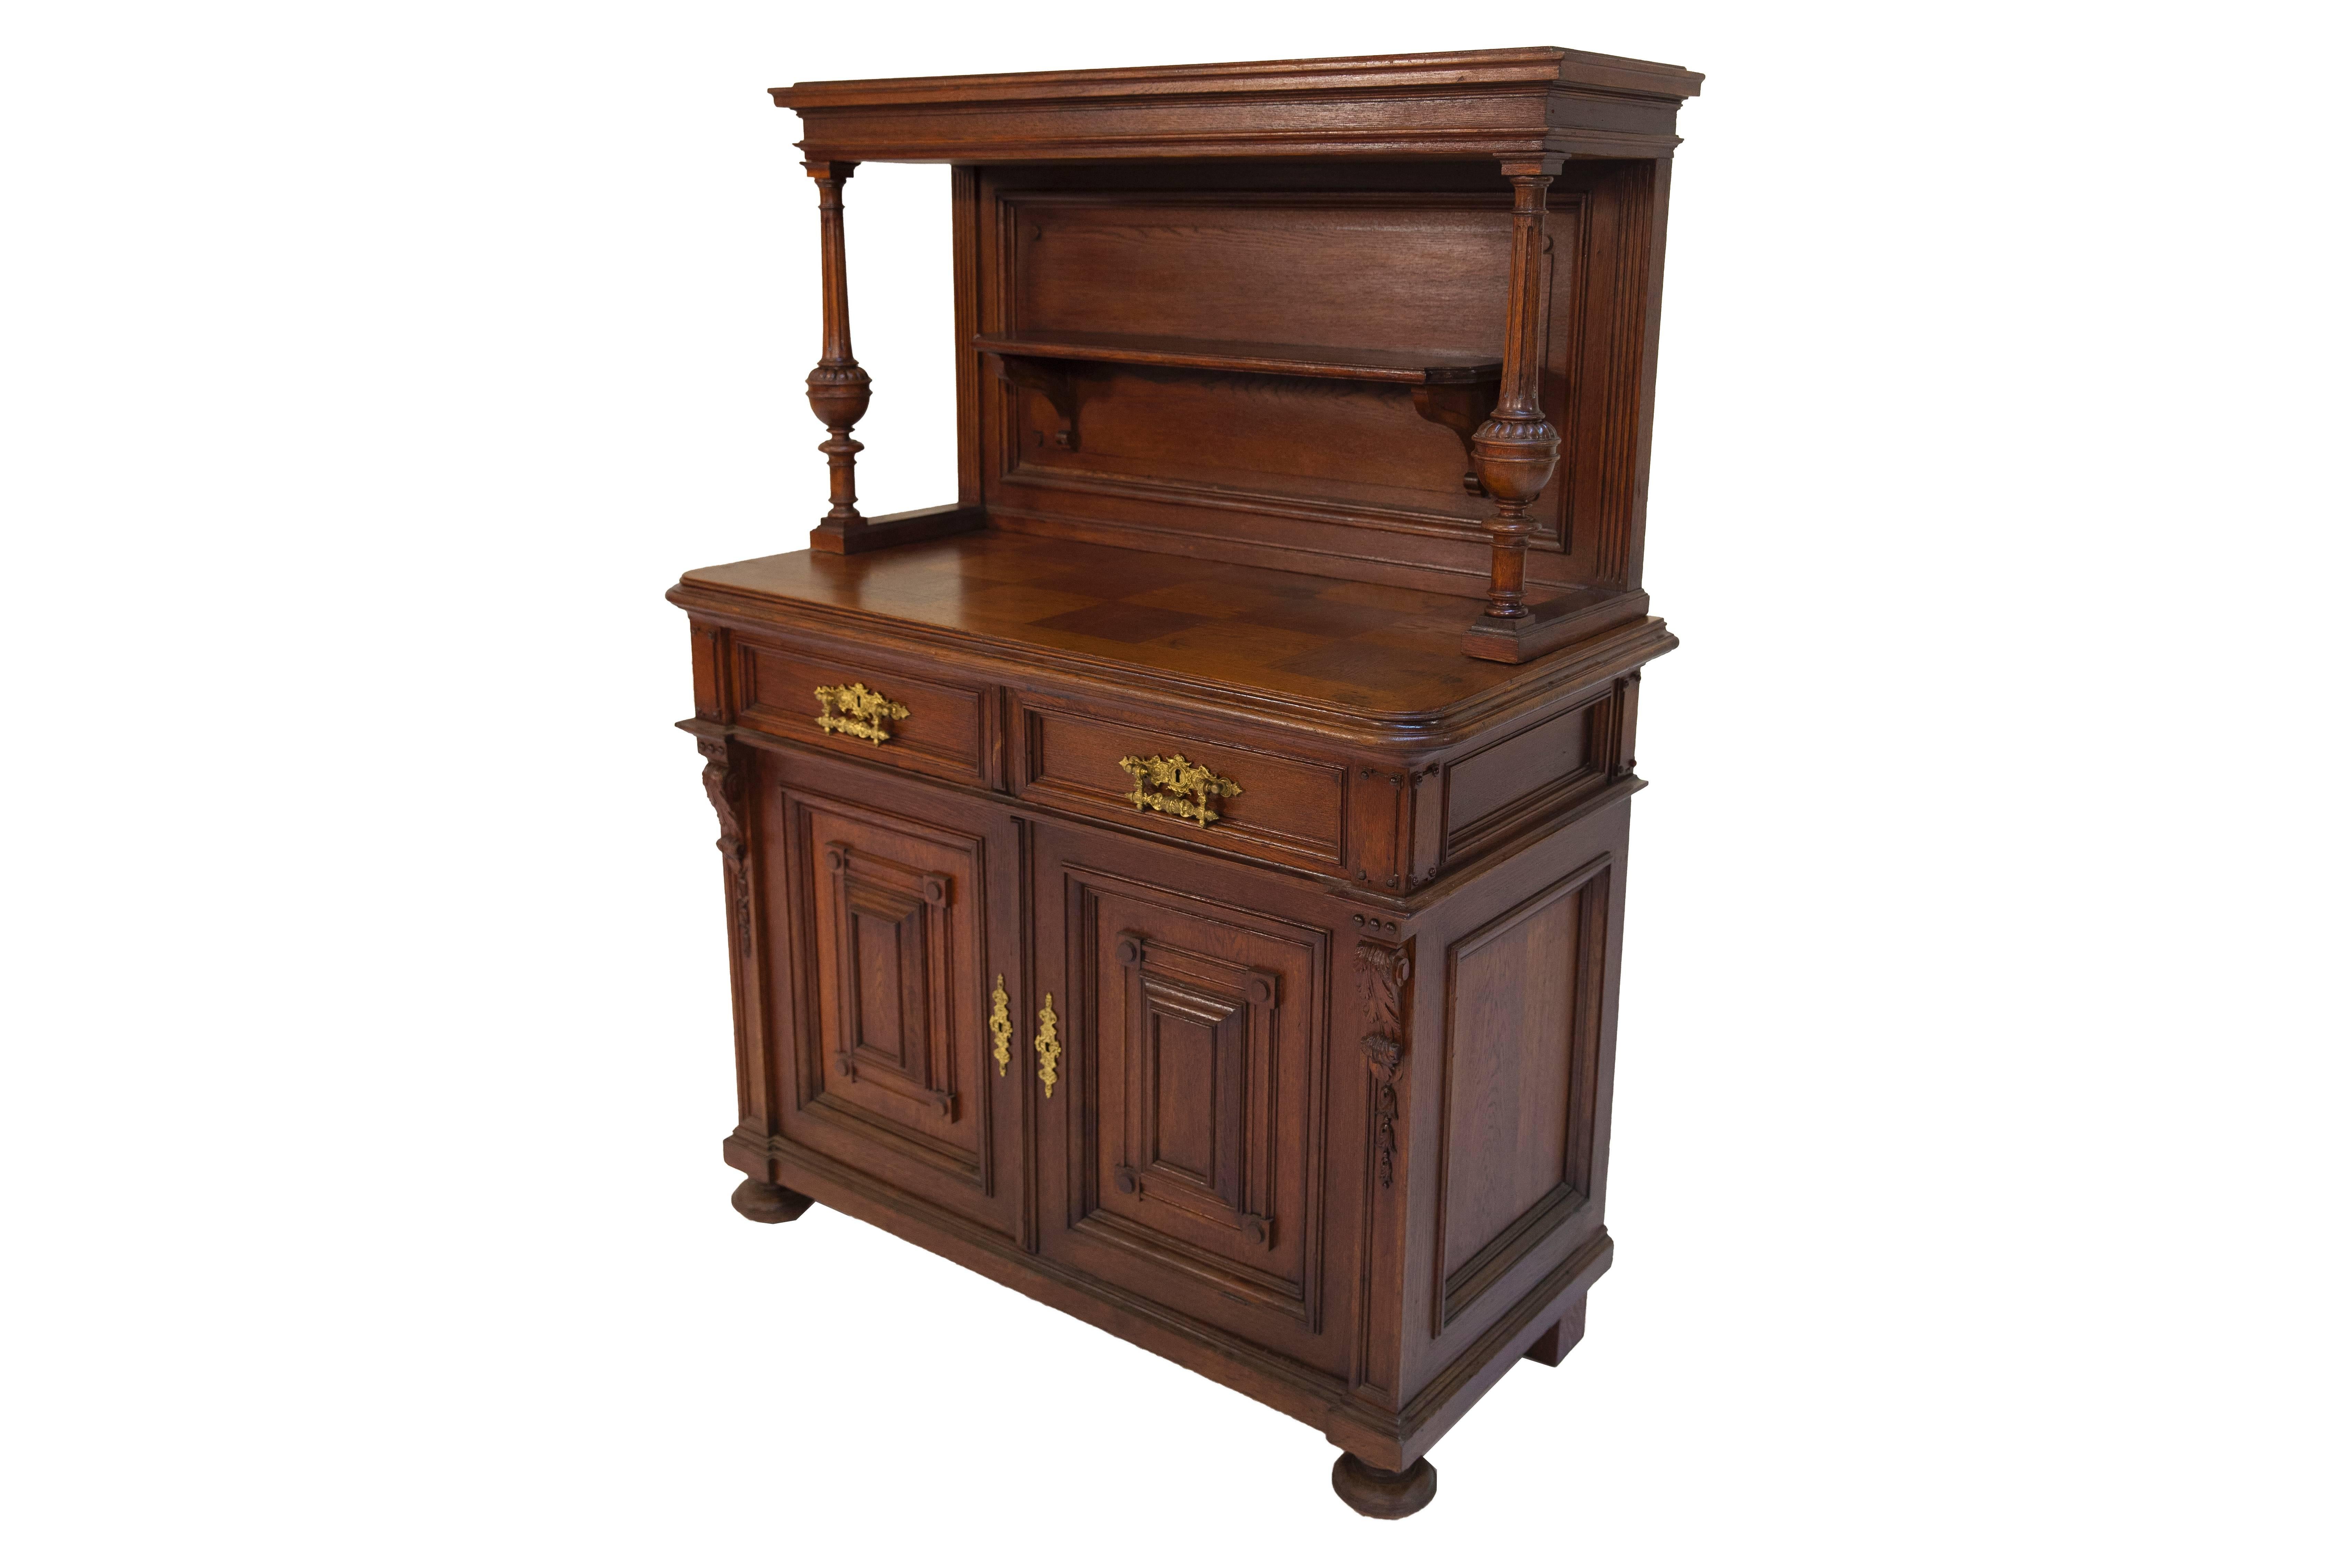 In very good, cared-for condition. The sideboard has two doors and above them, two drawers, and a top unit on the cover plate. The doors are coffered, and their cut-outs are fitted with doubled-on panels. Pilaster columns are attached to the right